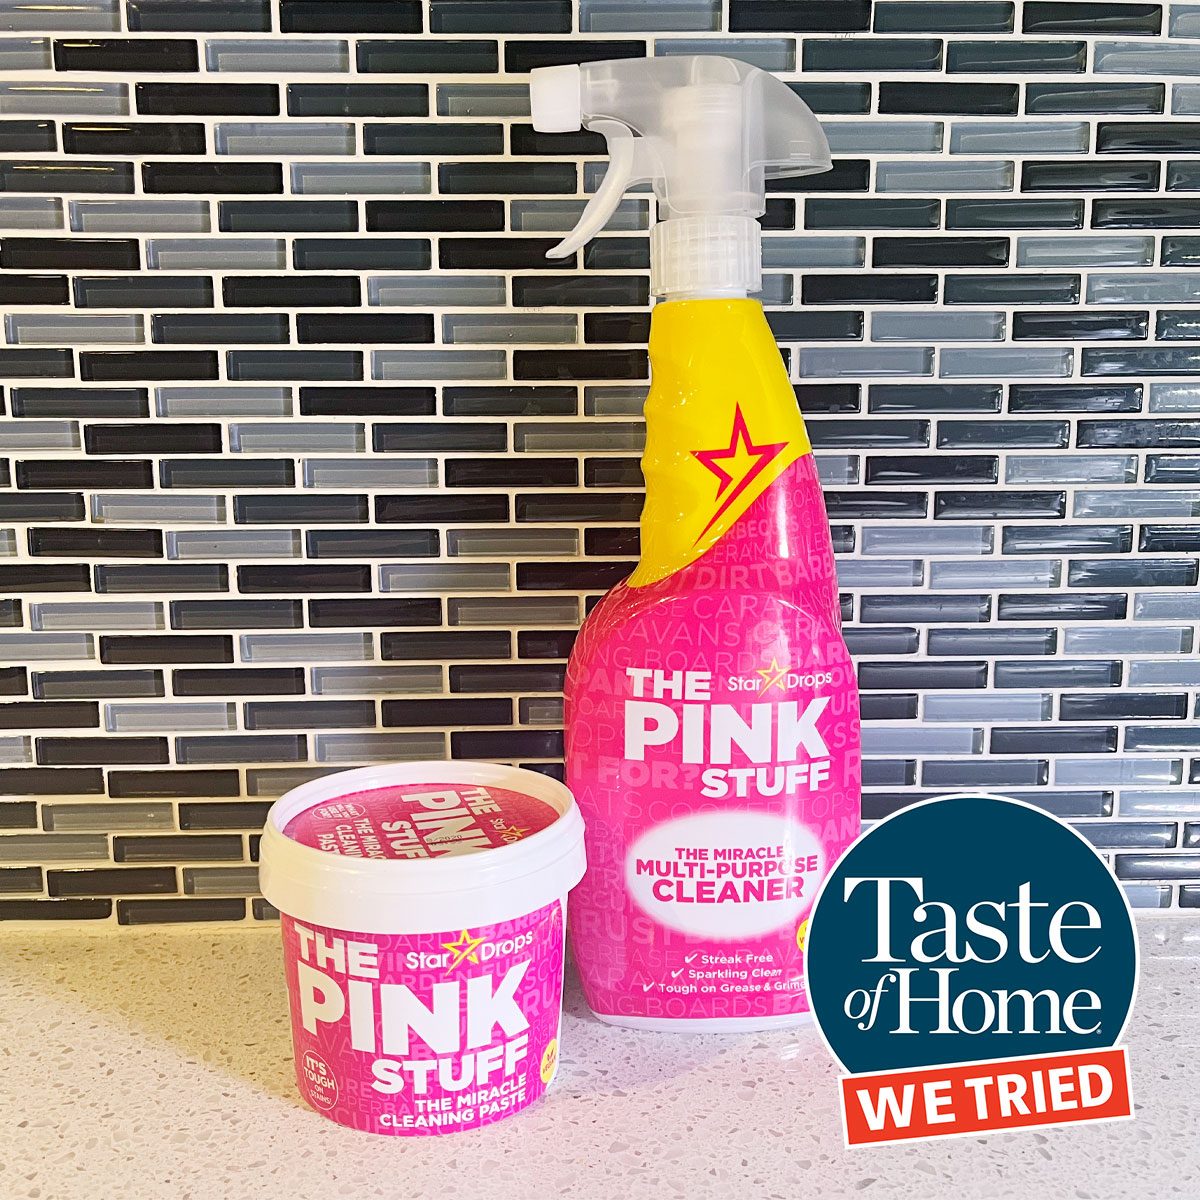 The Pink Stuff cleaner review: the TikTok product lives up to the